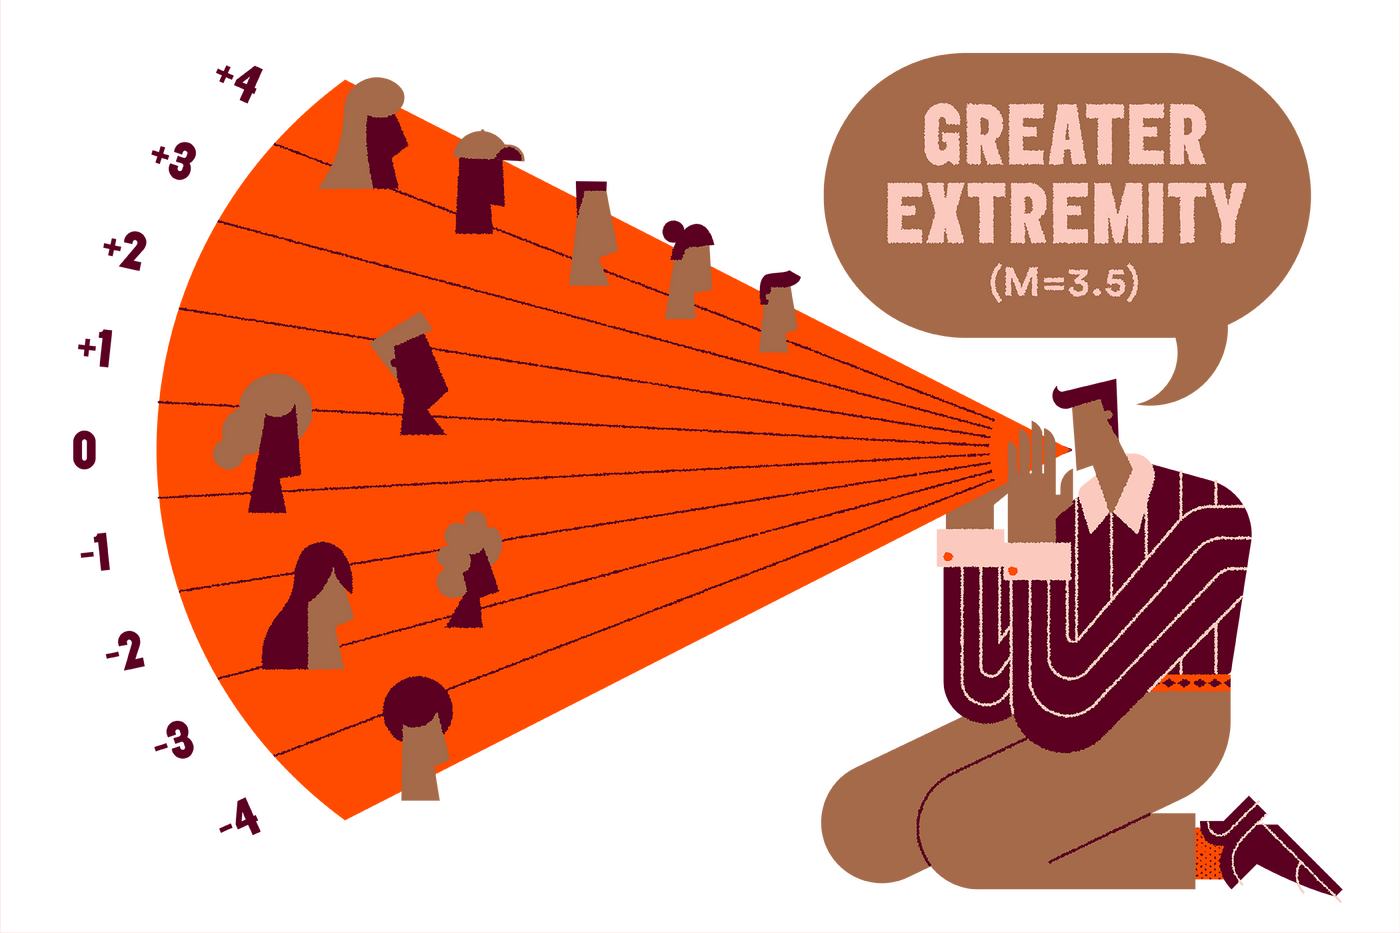 An illustration depicting an extremity strategy